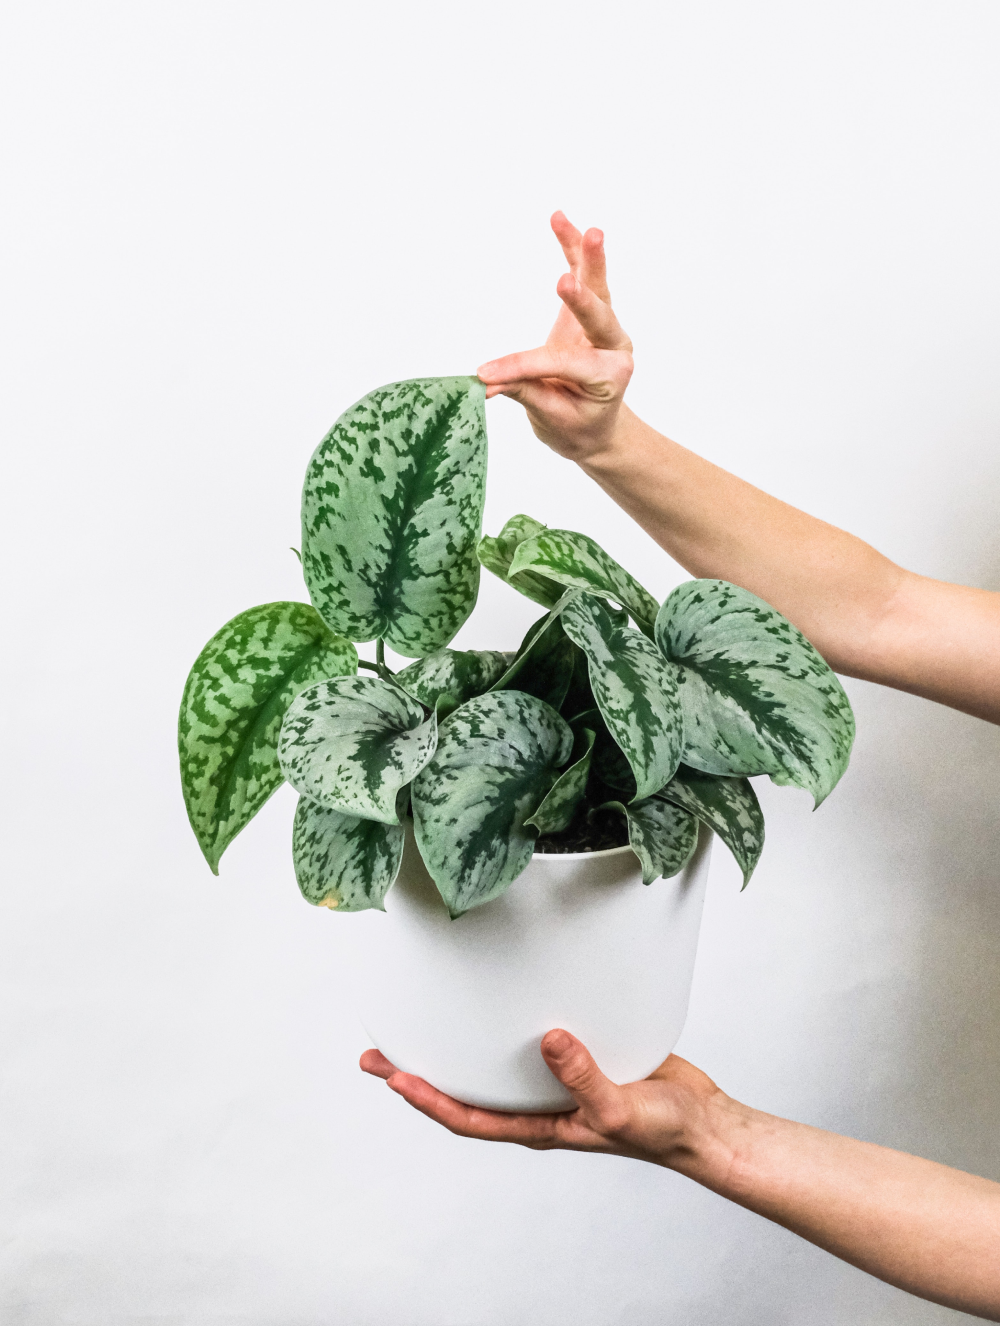 Two hands holding a plant with a white pot